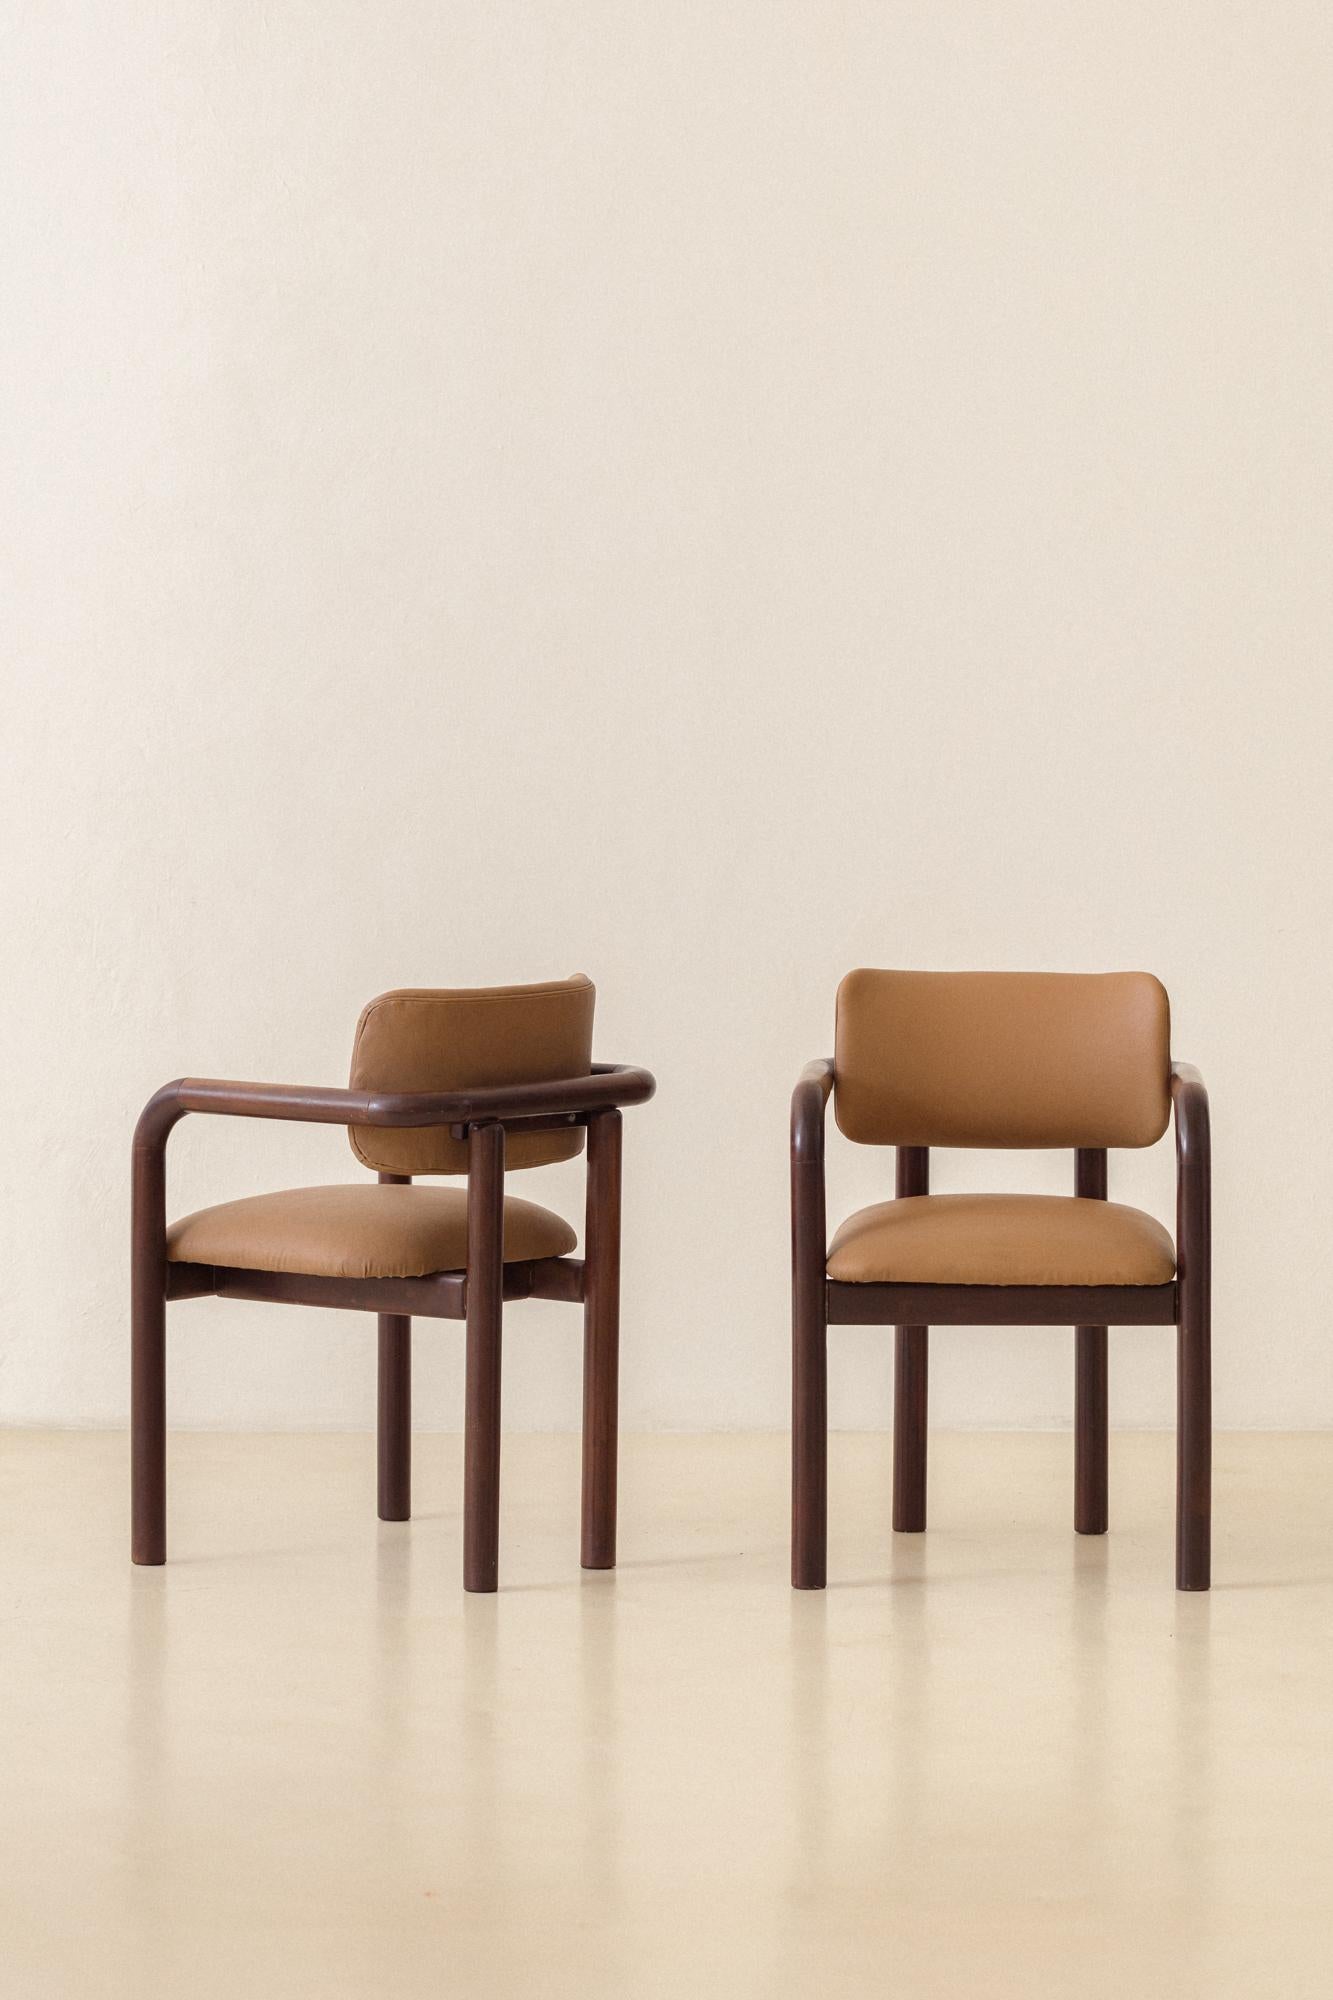 Brazilian Midcentury Design, Solid Imbuia Dining Chairs with Armrests, 1950s For Sale 4